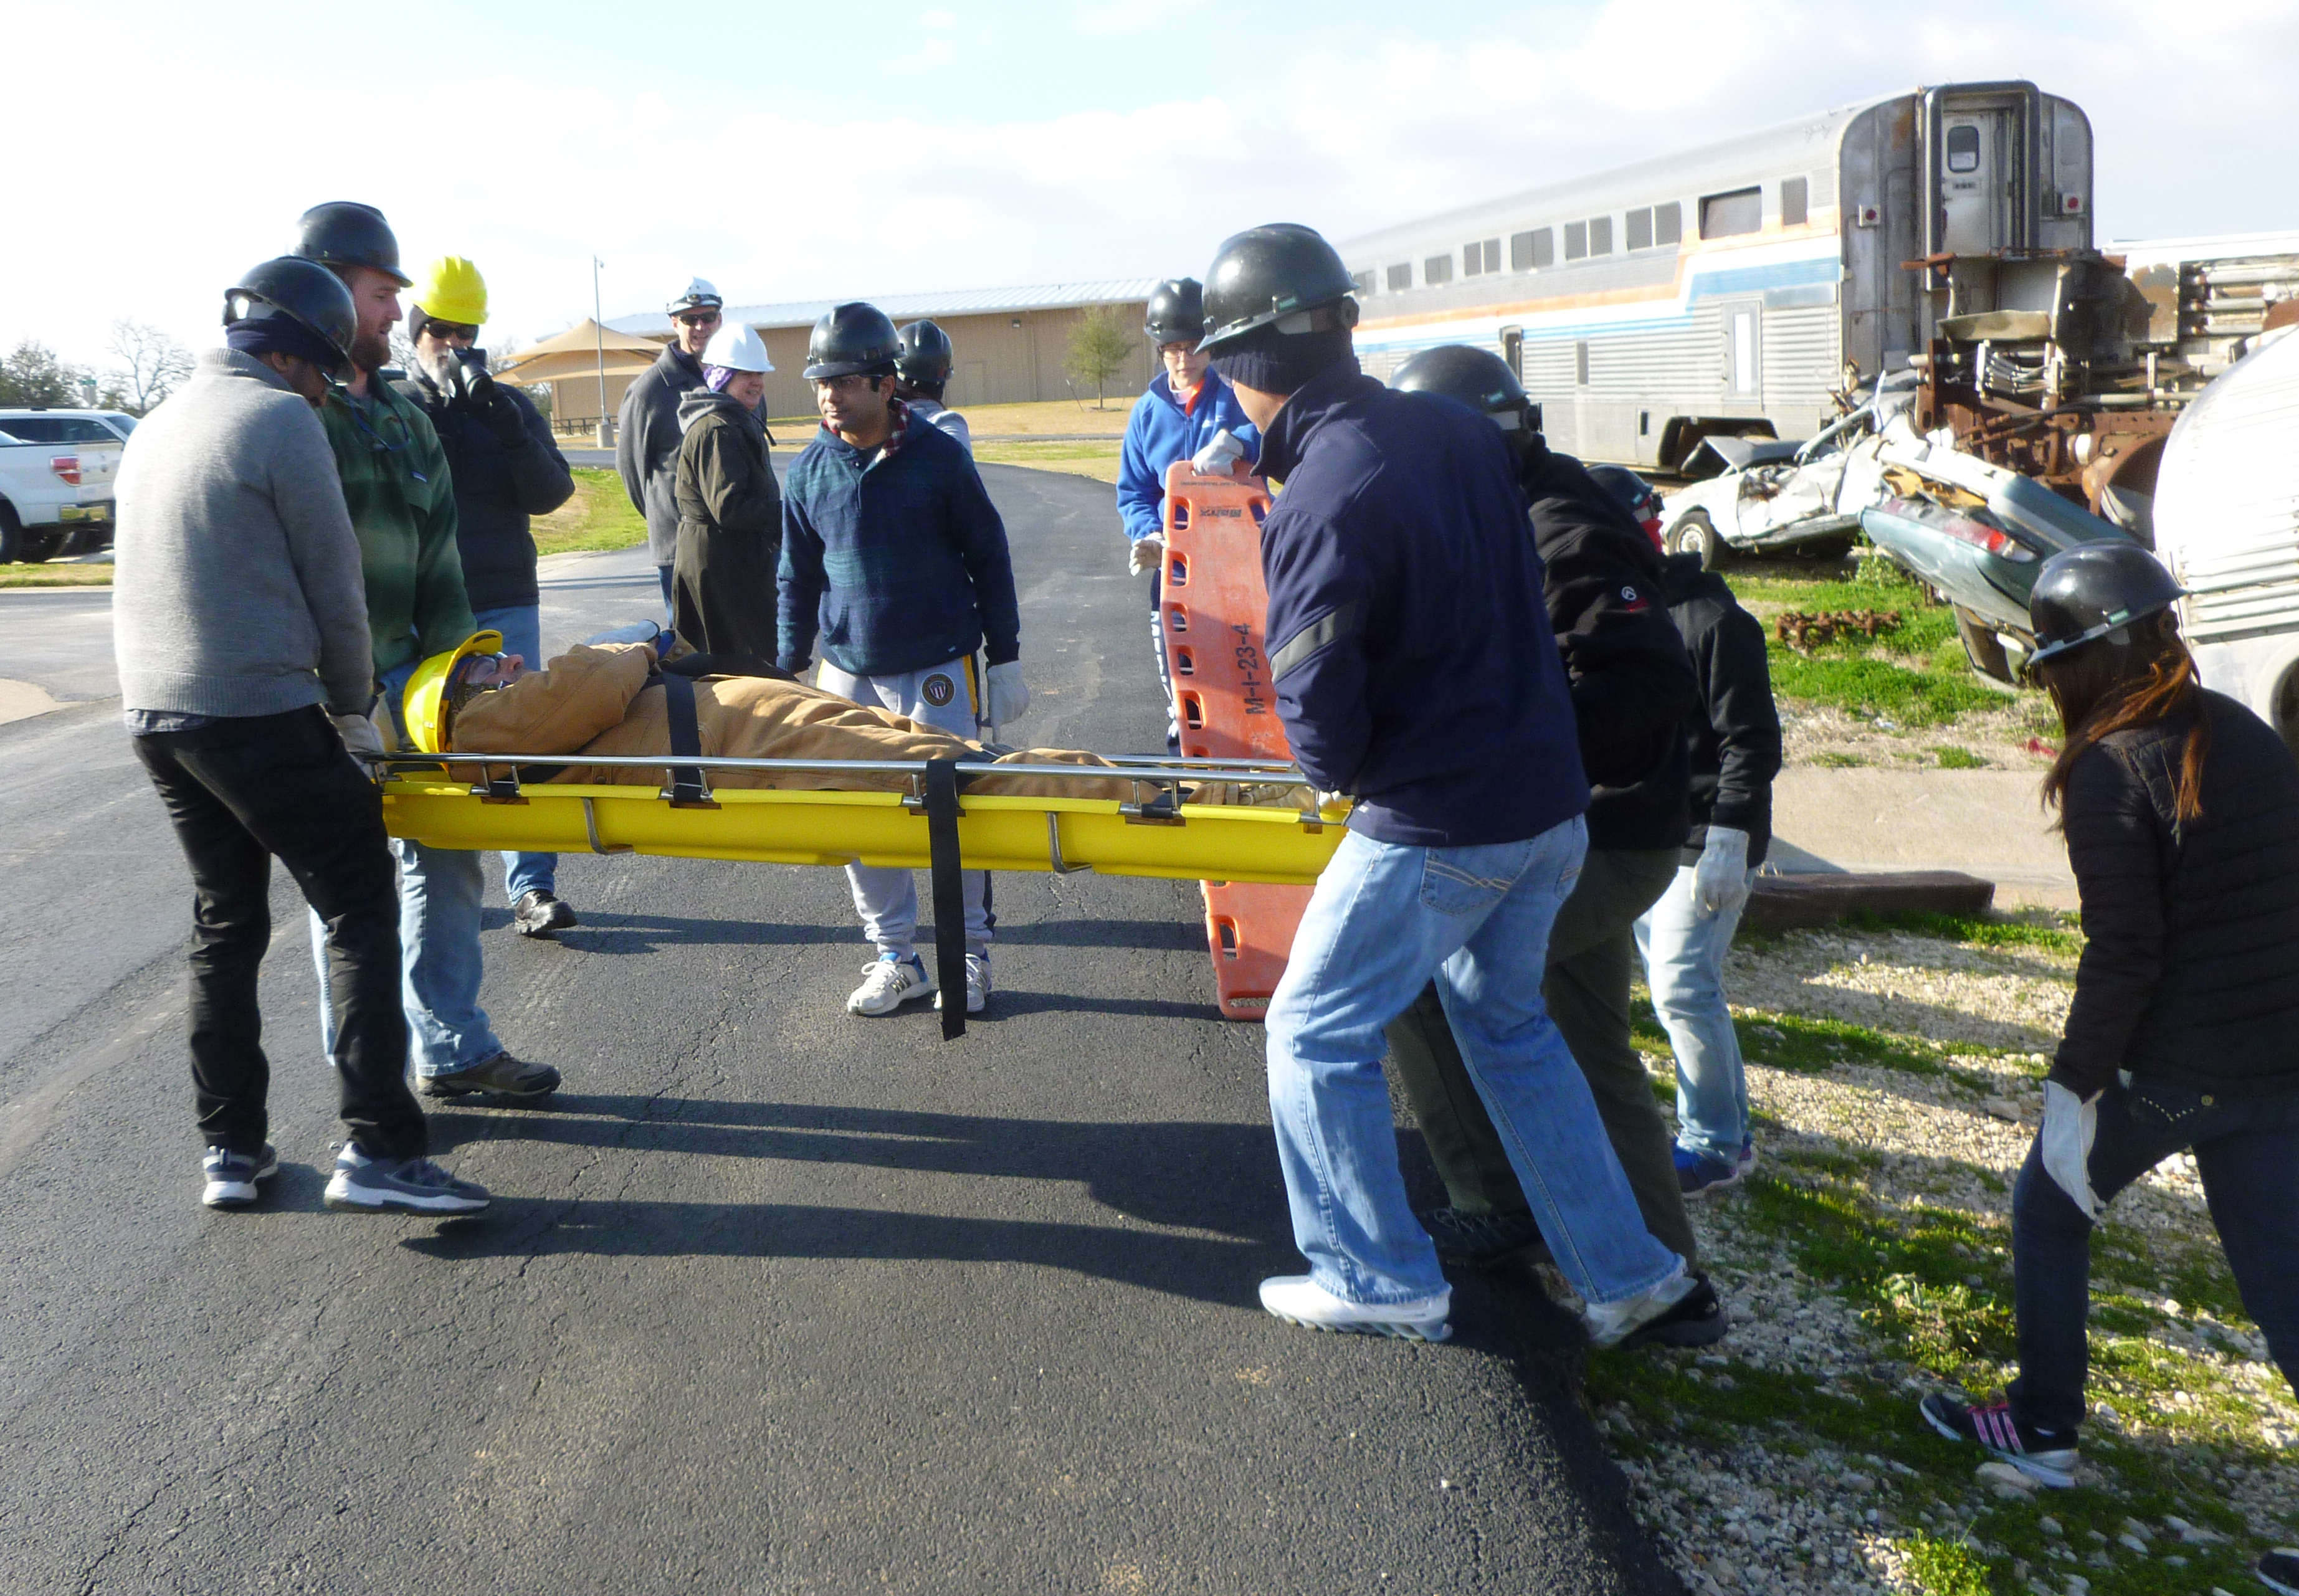 MBA students learn leadership, teamwork during Disaster City ...